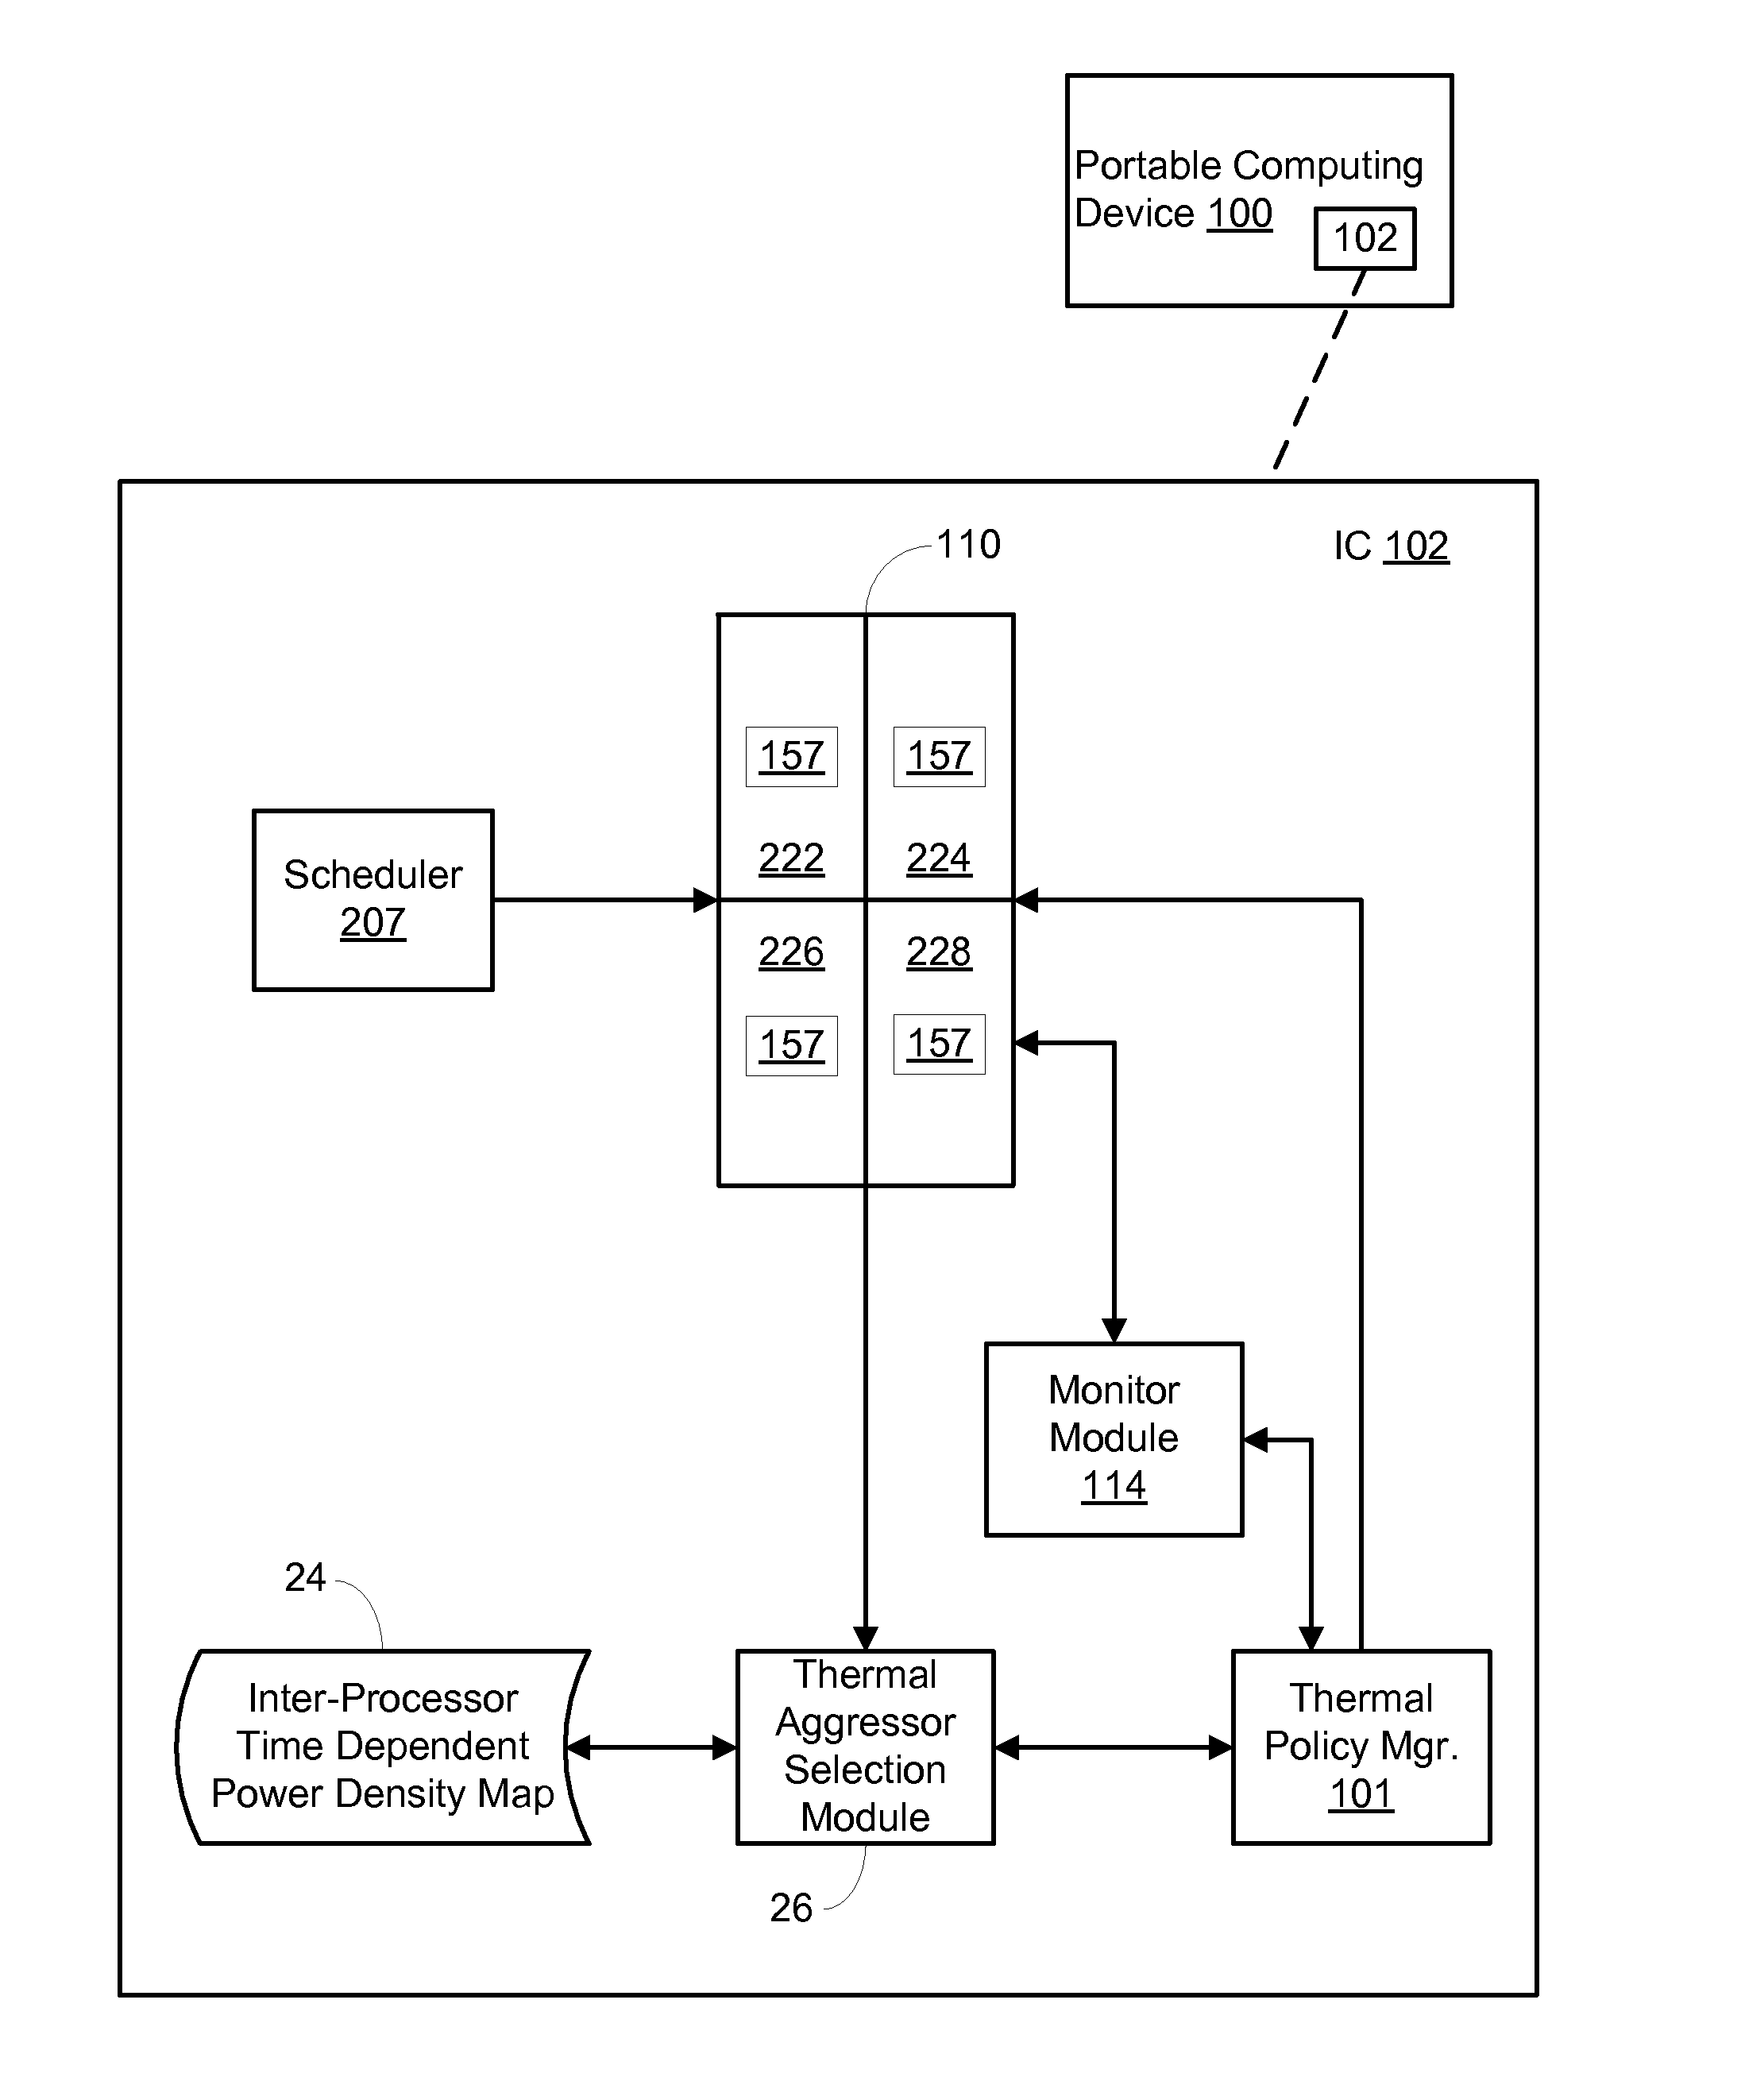 On-chip thermal management techniques using inter-processor time dependent power density data for indentification of thermal aggressors